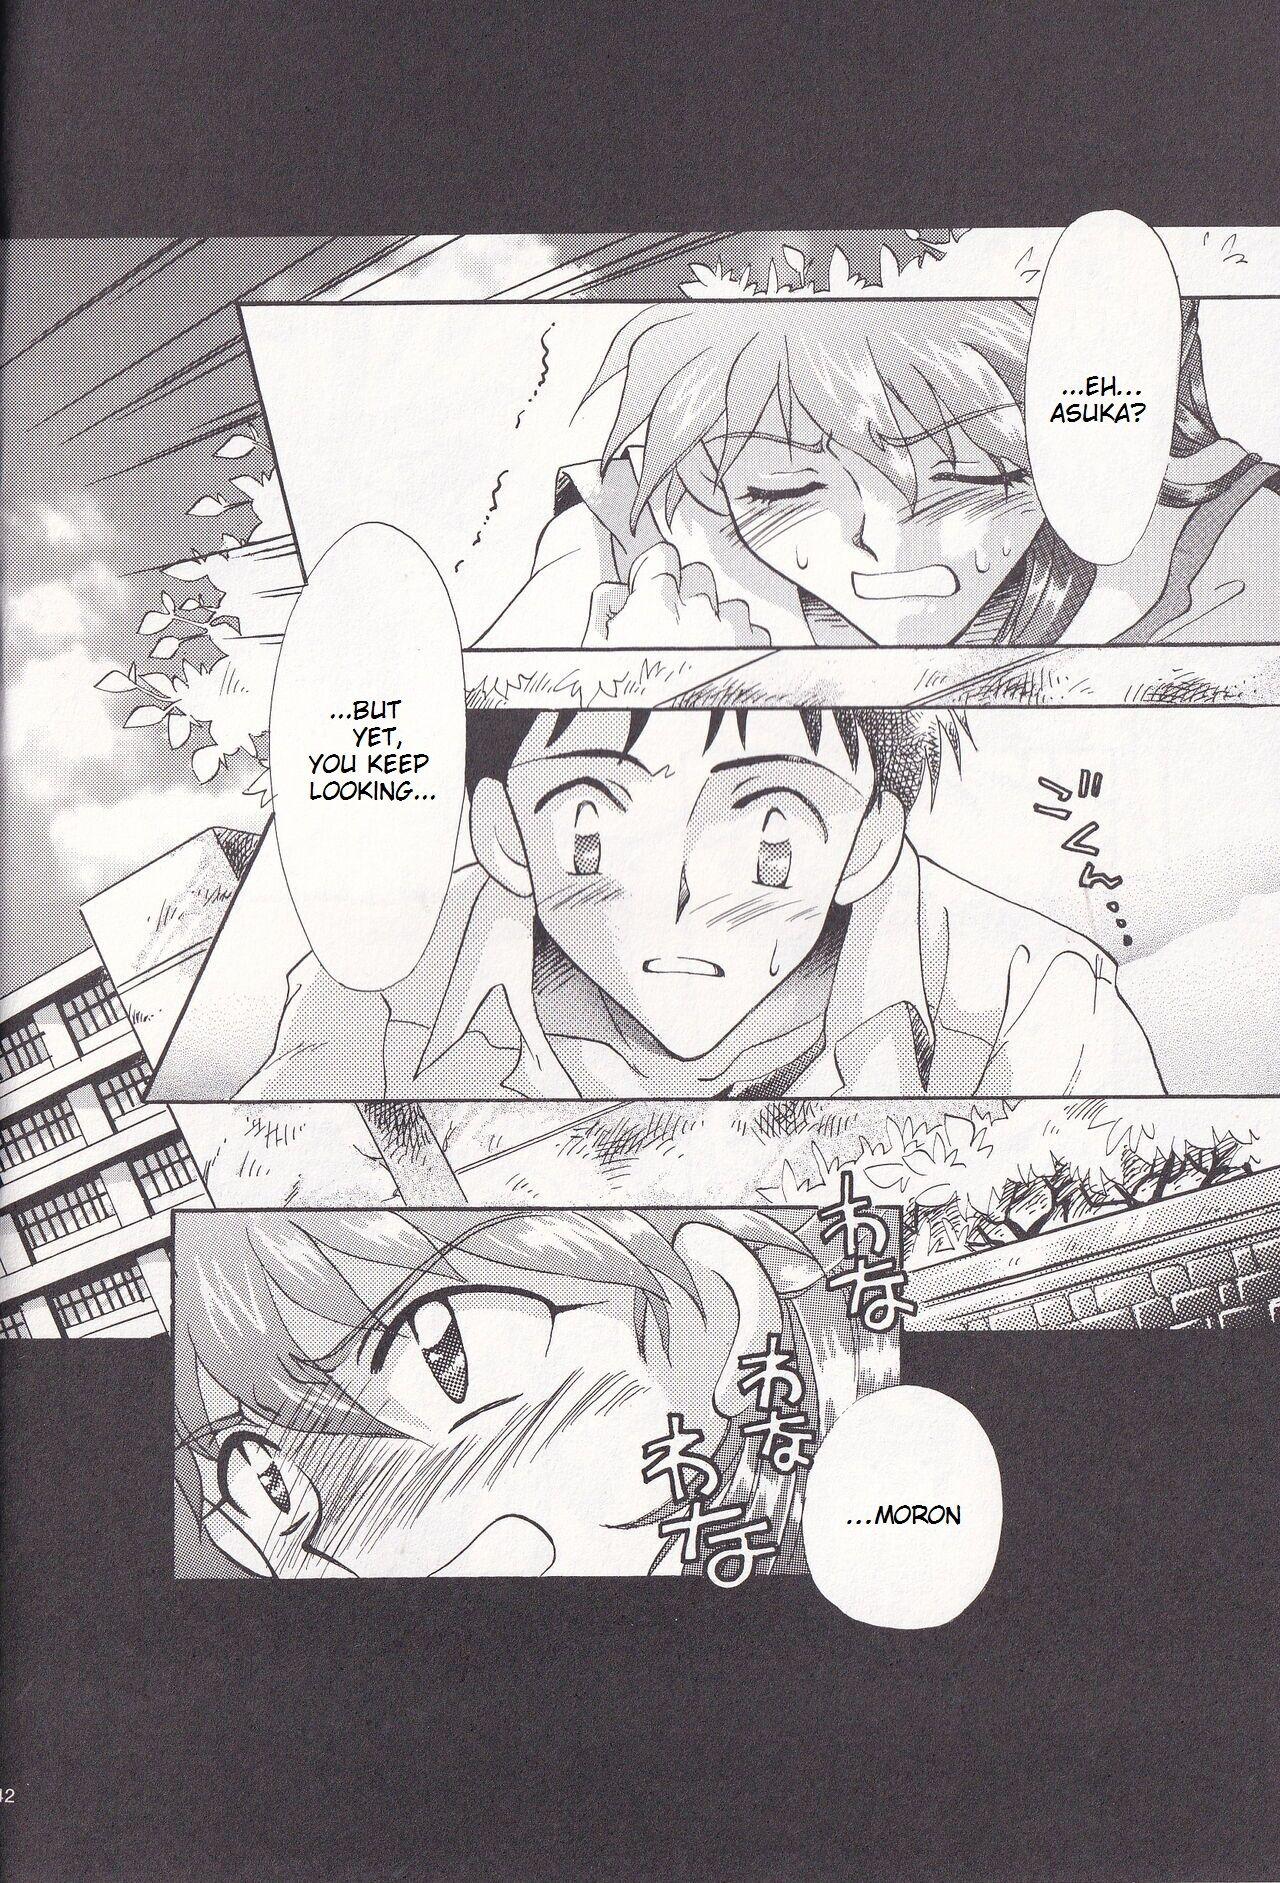 Role Play Close your eyes Episode 0:4 - Neon genesis evangelion Hot Girls Fucking - Page 8